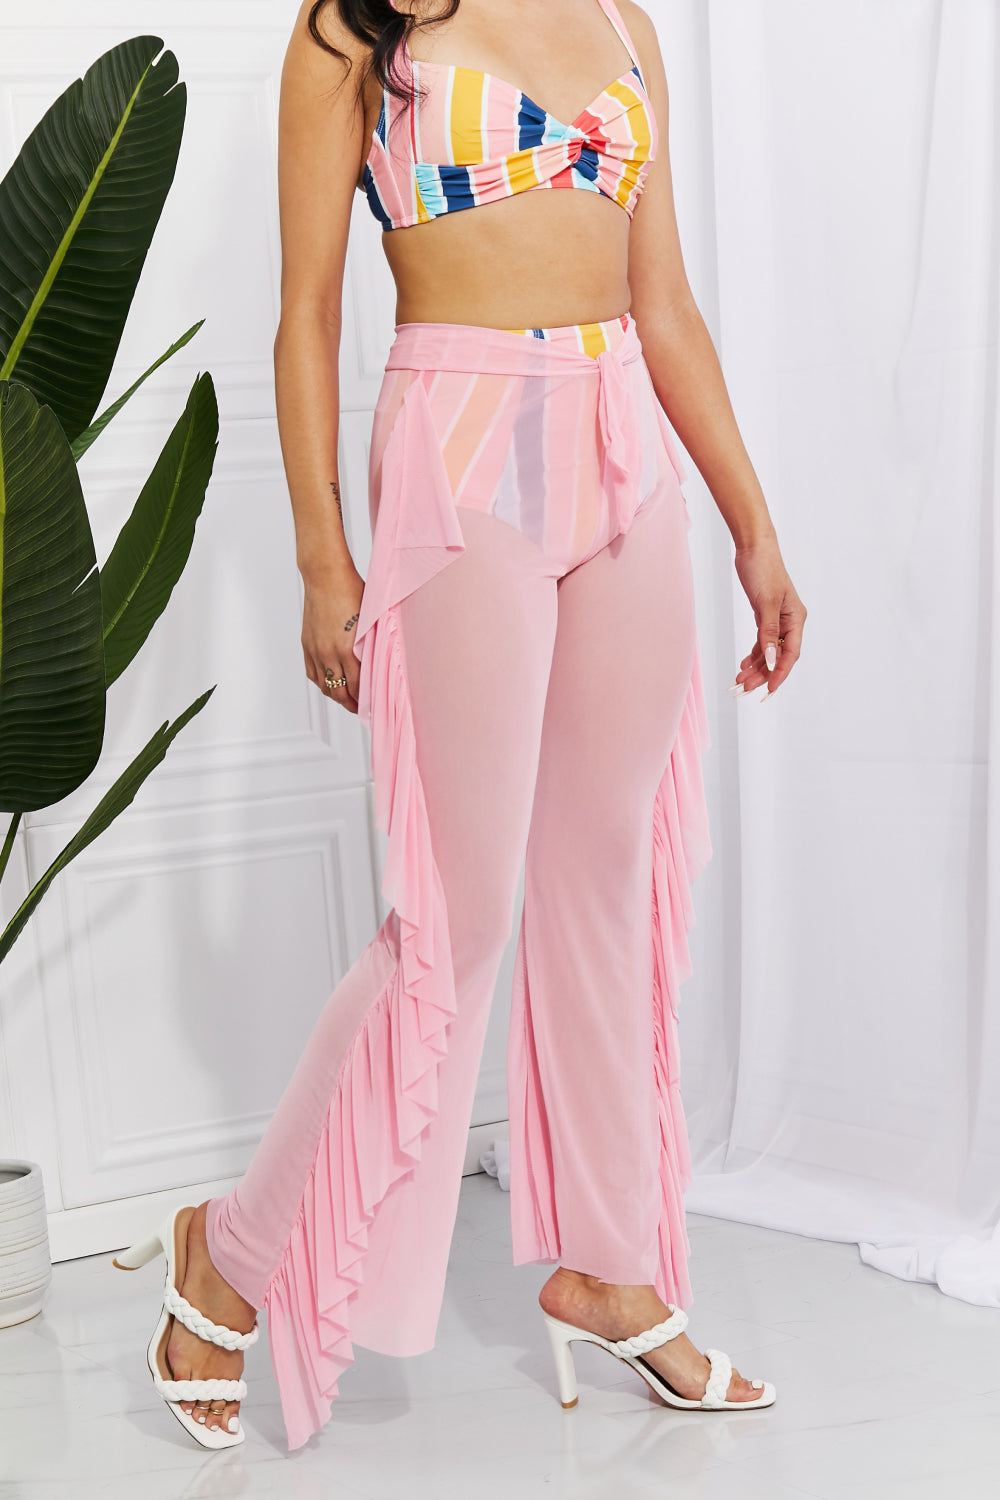 GO WITH THE FLOW MESH RUFFLE COVER UP PANTS